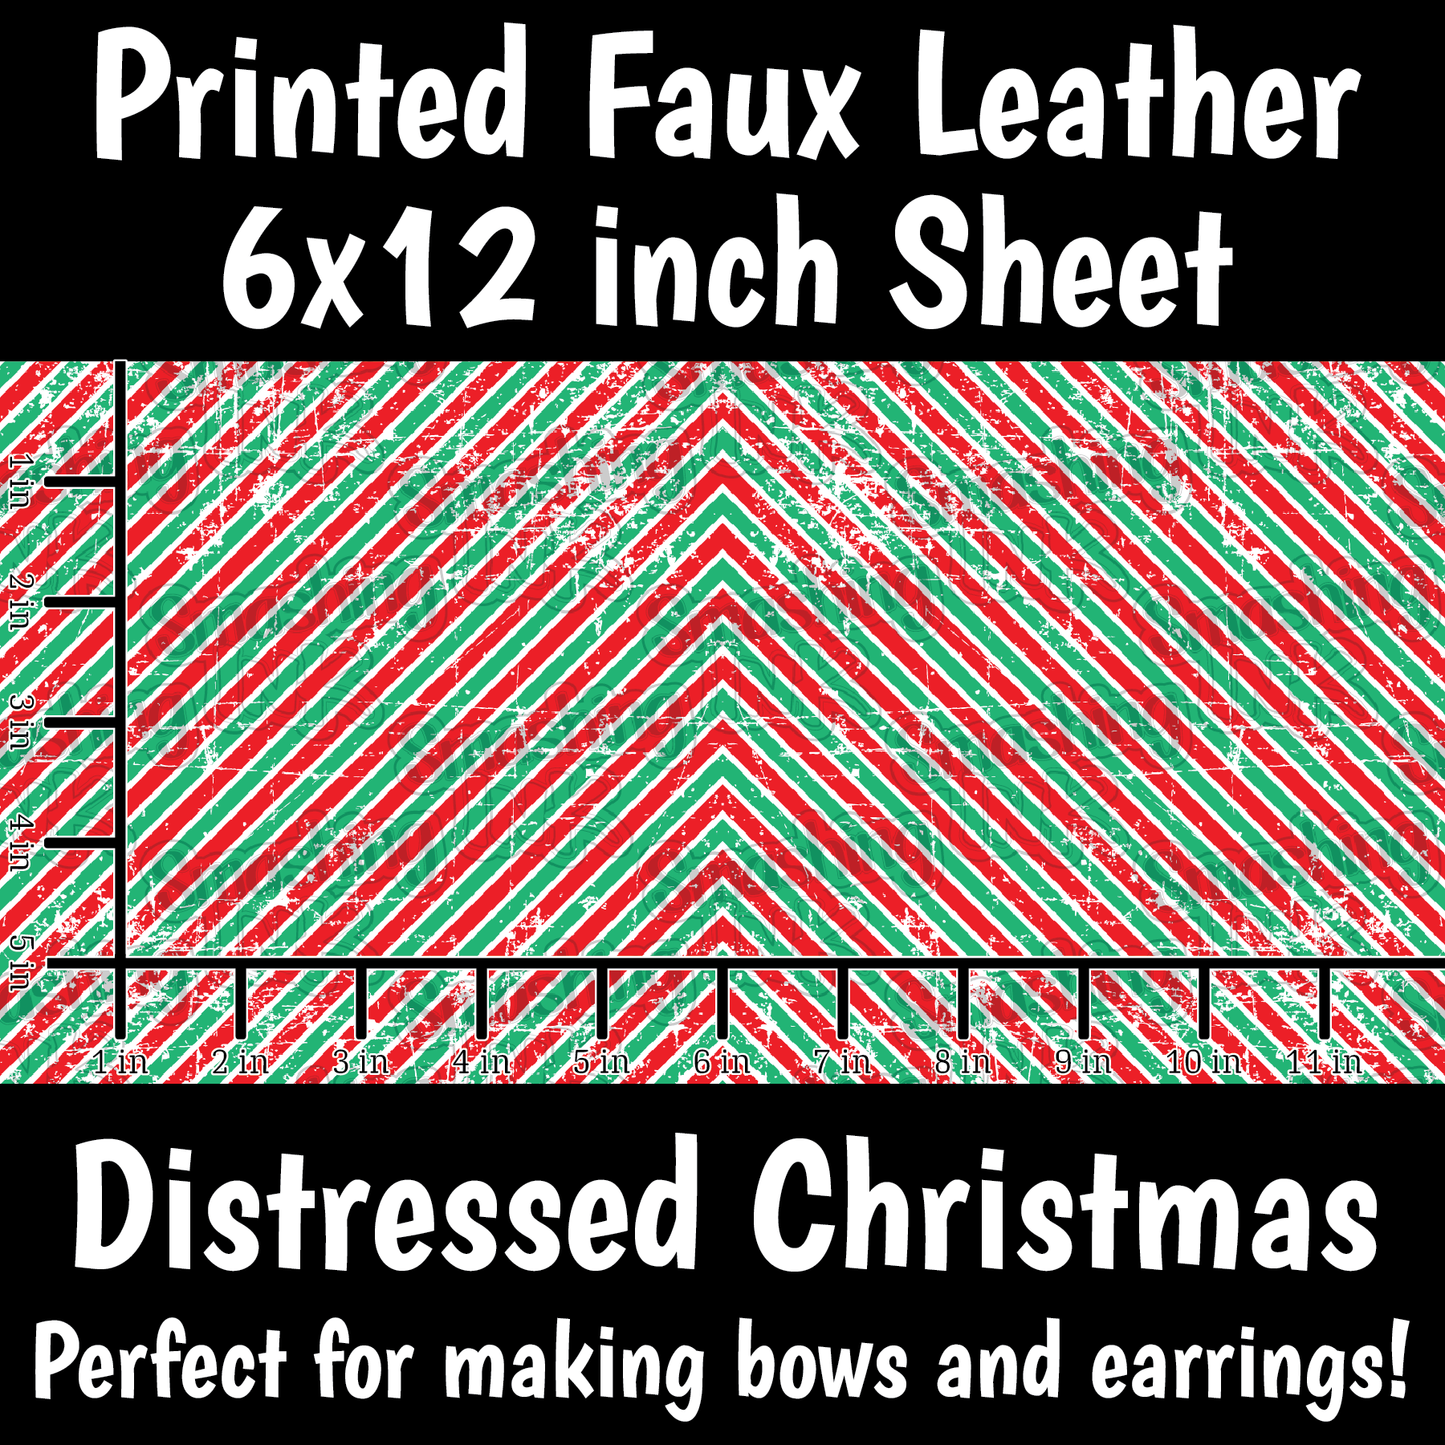 Distressed Christmas - Faux Leather Sheet (SHIPS IN 3 BUS DAYS)